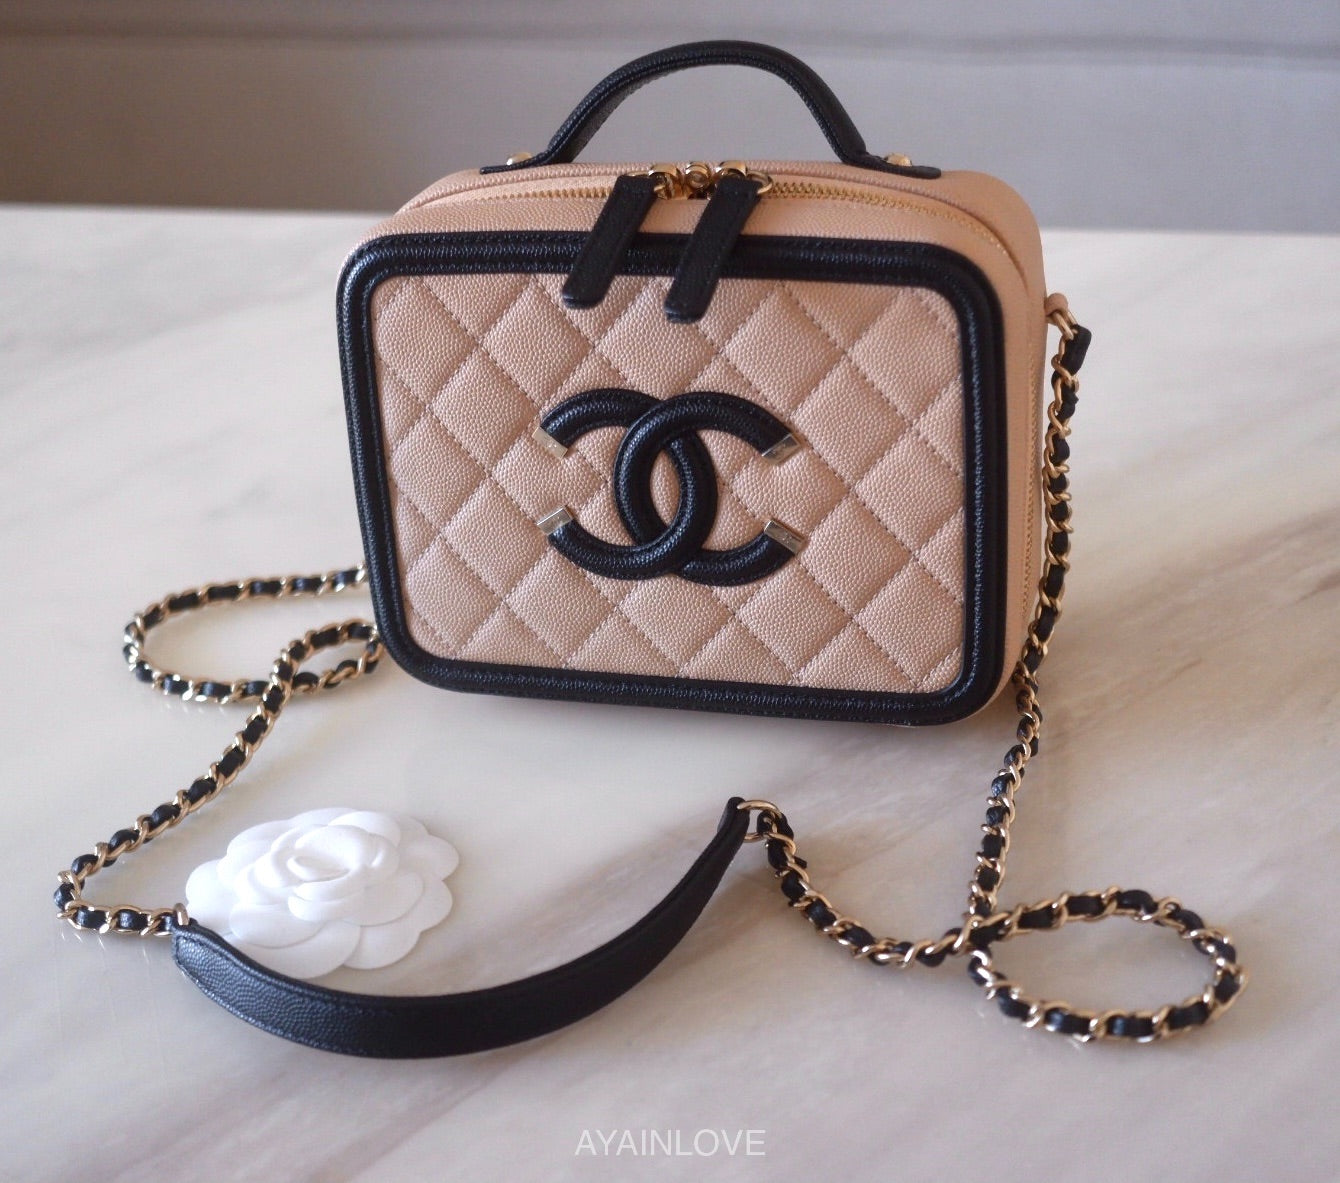 Chanel vanity case  Airee Edwards